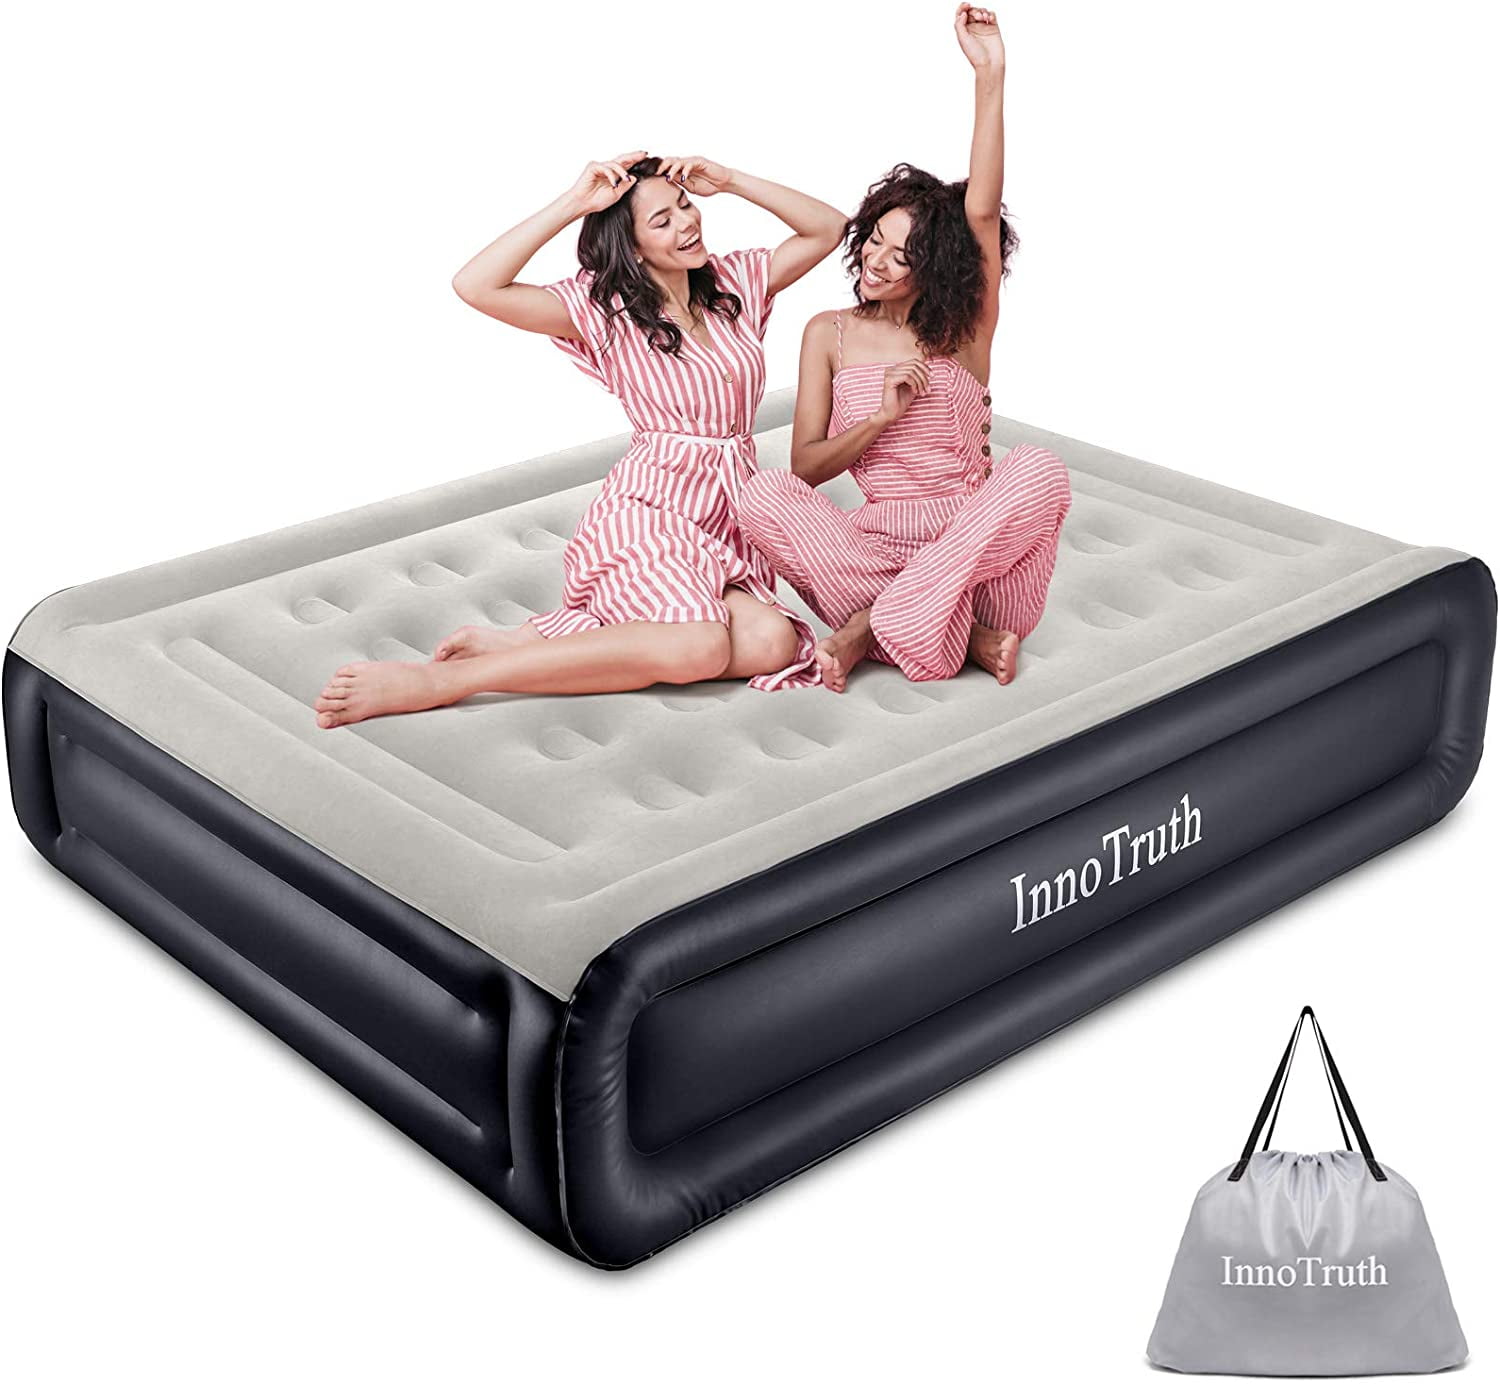 Twin Queen Size Inflatable Air Mattress Bed Pillow Top Soft with Built in Pillow 